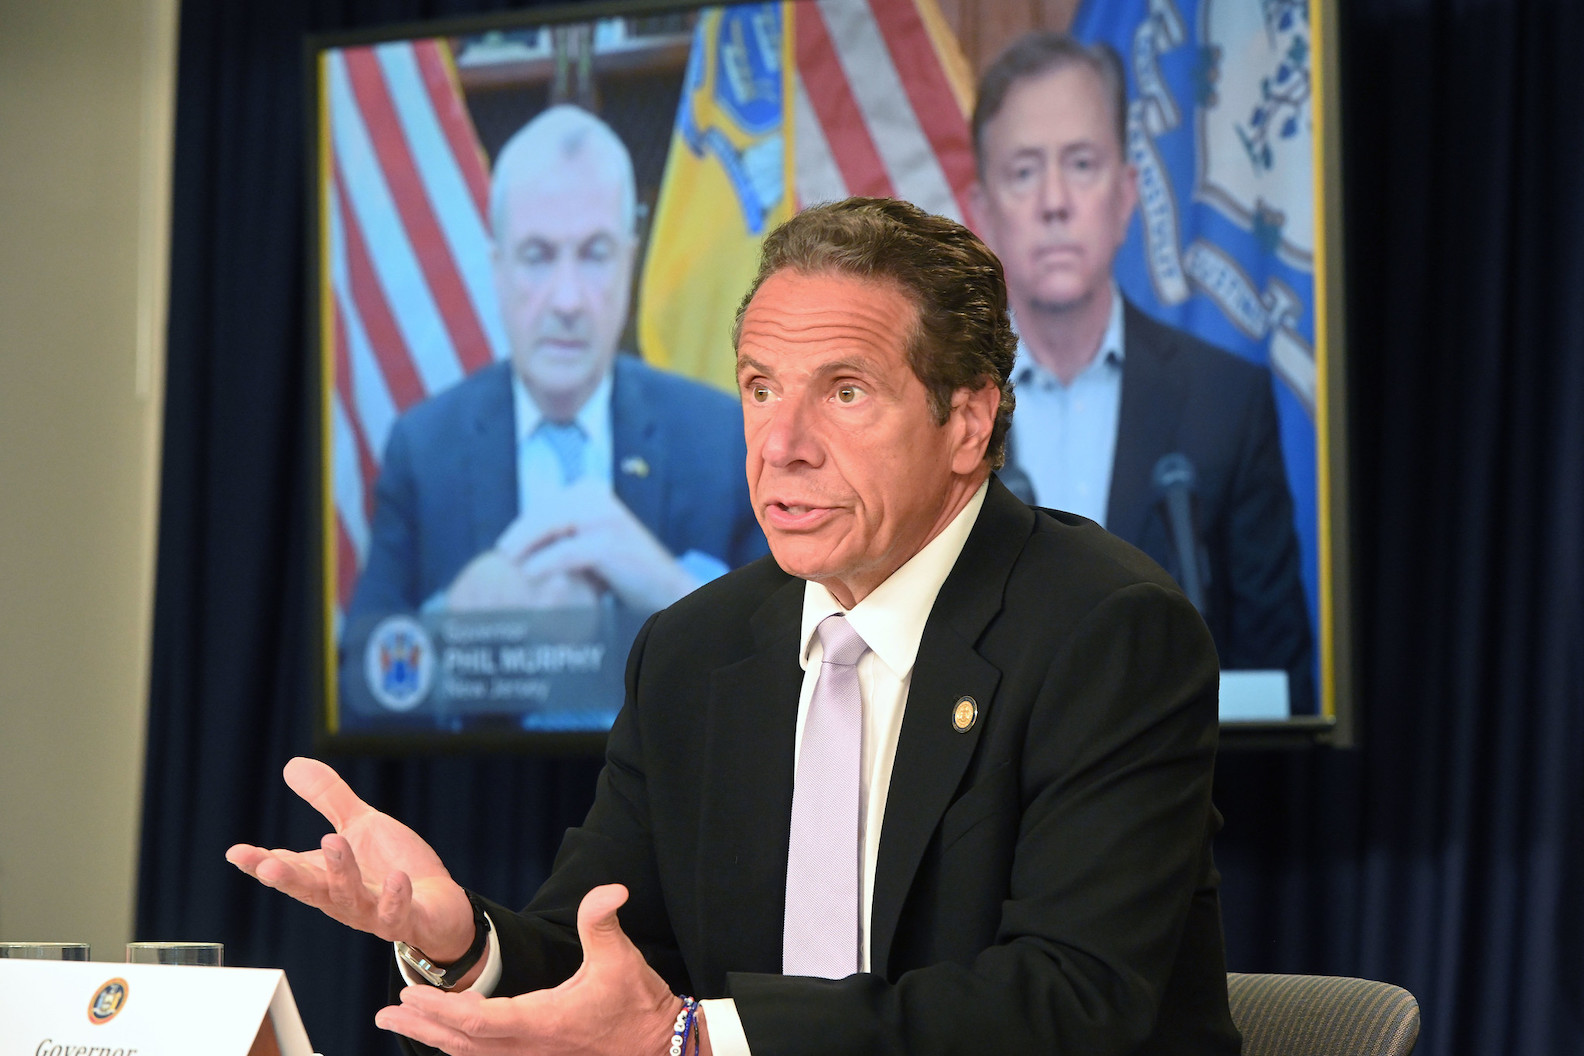 Govs. Cuomo, Murphy and Lamont announce a joint incoming travel advisory that all individuals traveling from states with significant community spread of COVID-19 quarantine for 14 days. (Photo by (Kevin P. Coughlin/Office of Gov. Andrew M. Cuomo)